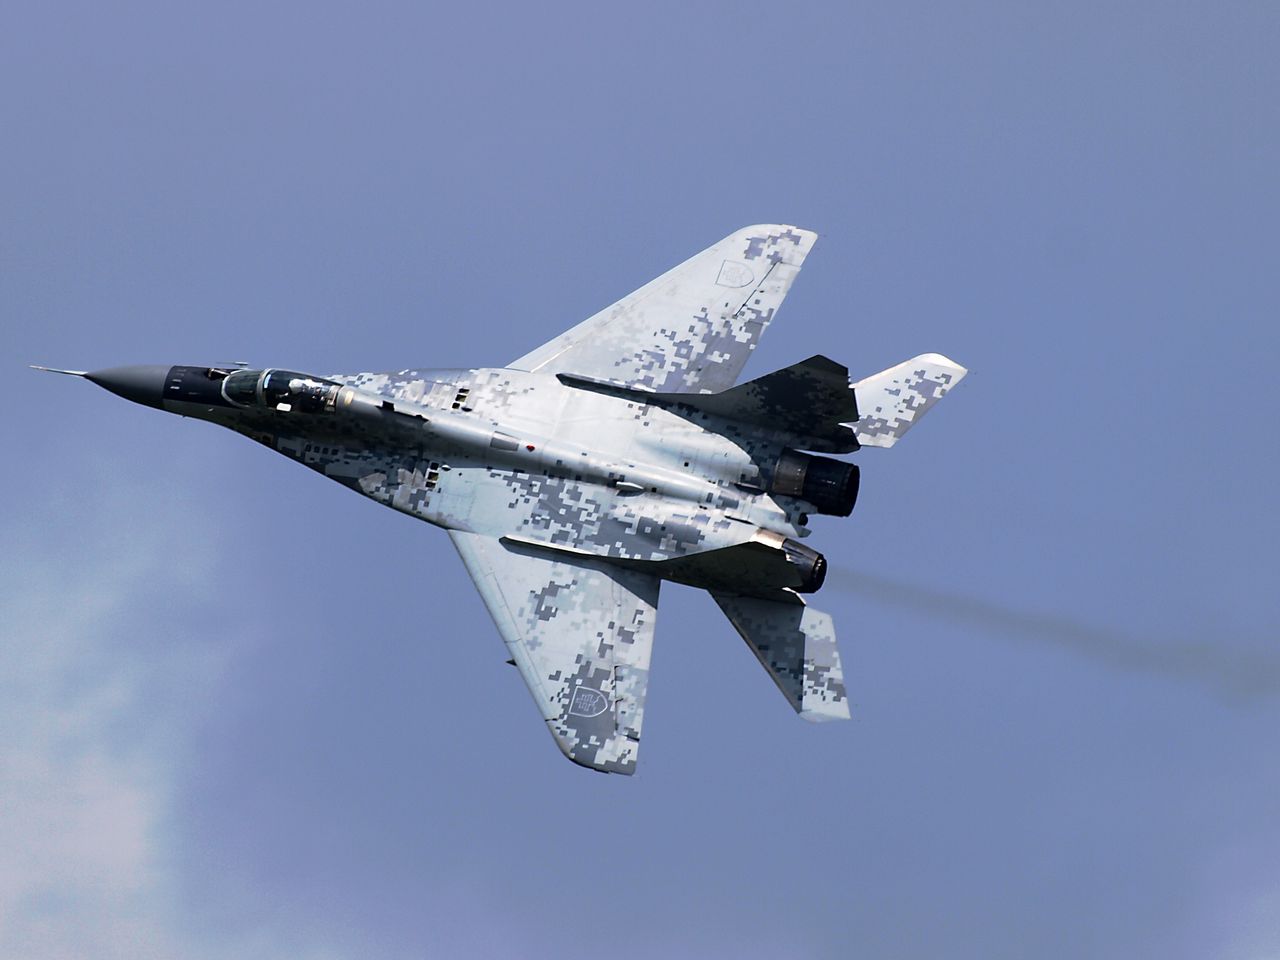 Poland's covert operations: supply of MiG-29 aircraft to bolster Ukraine's defense